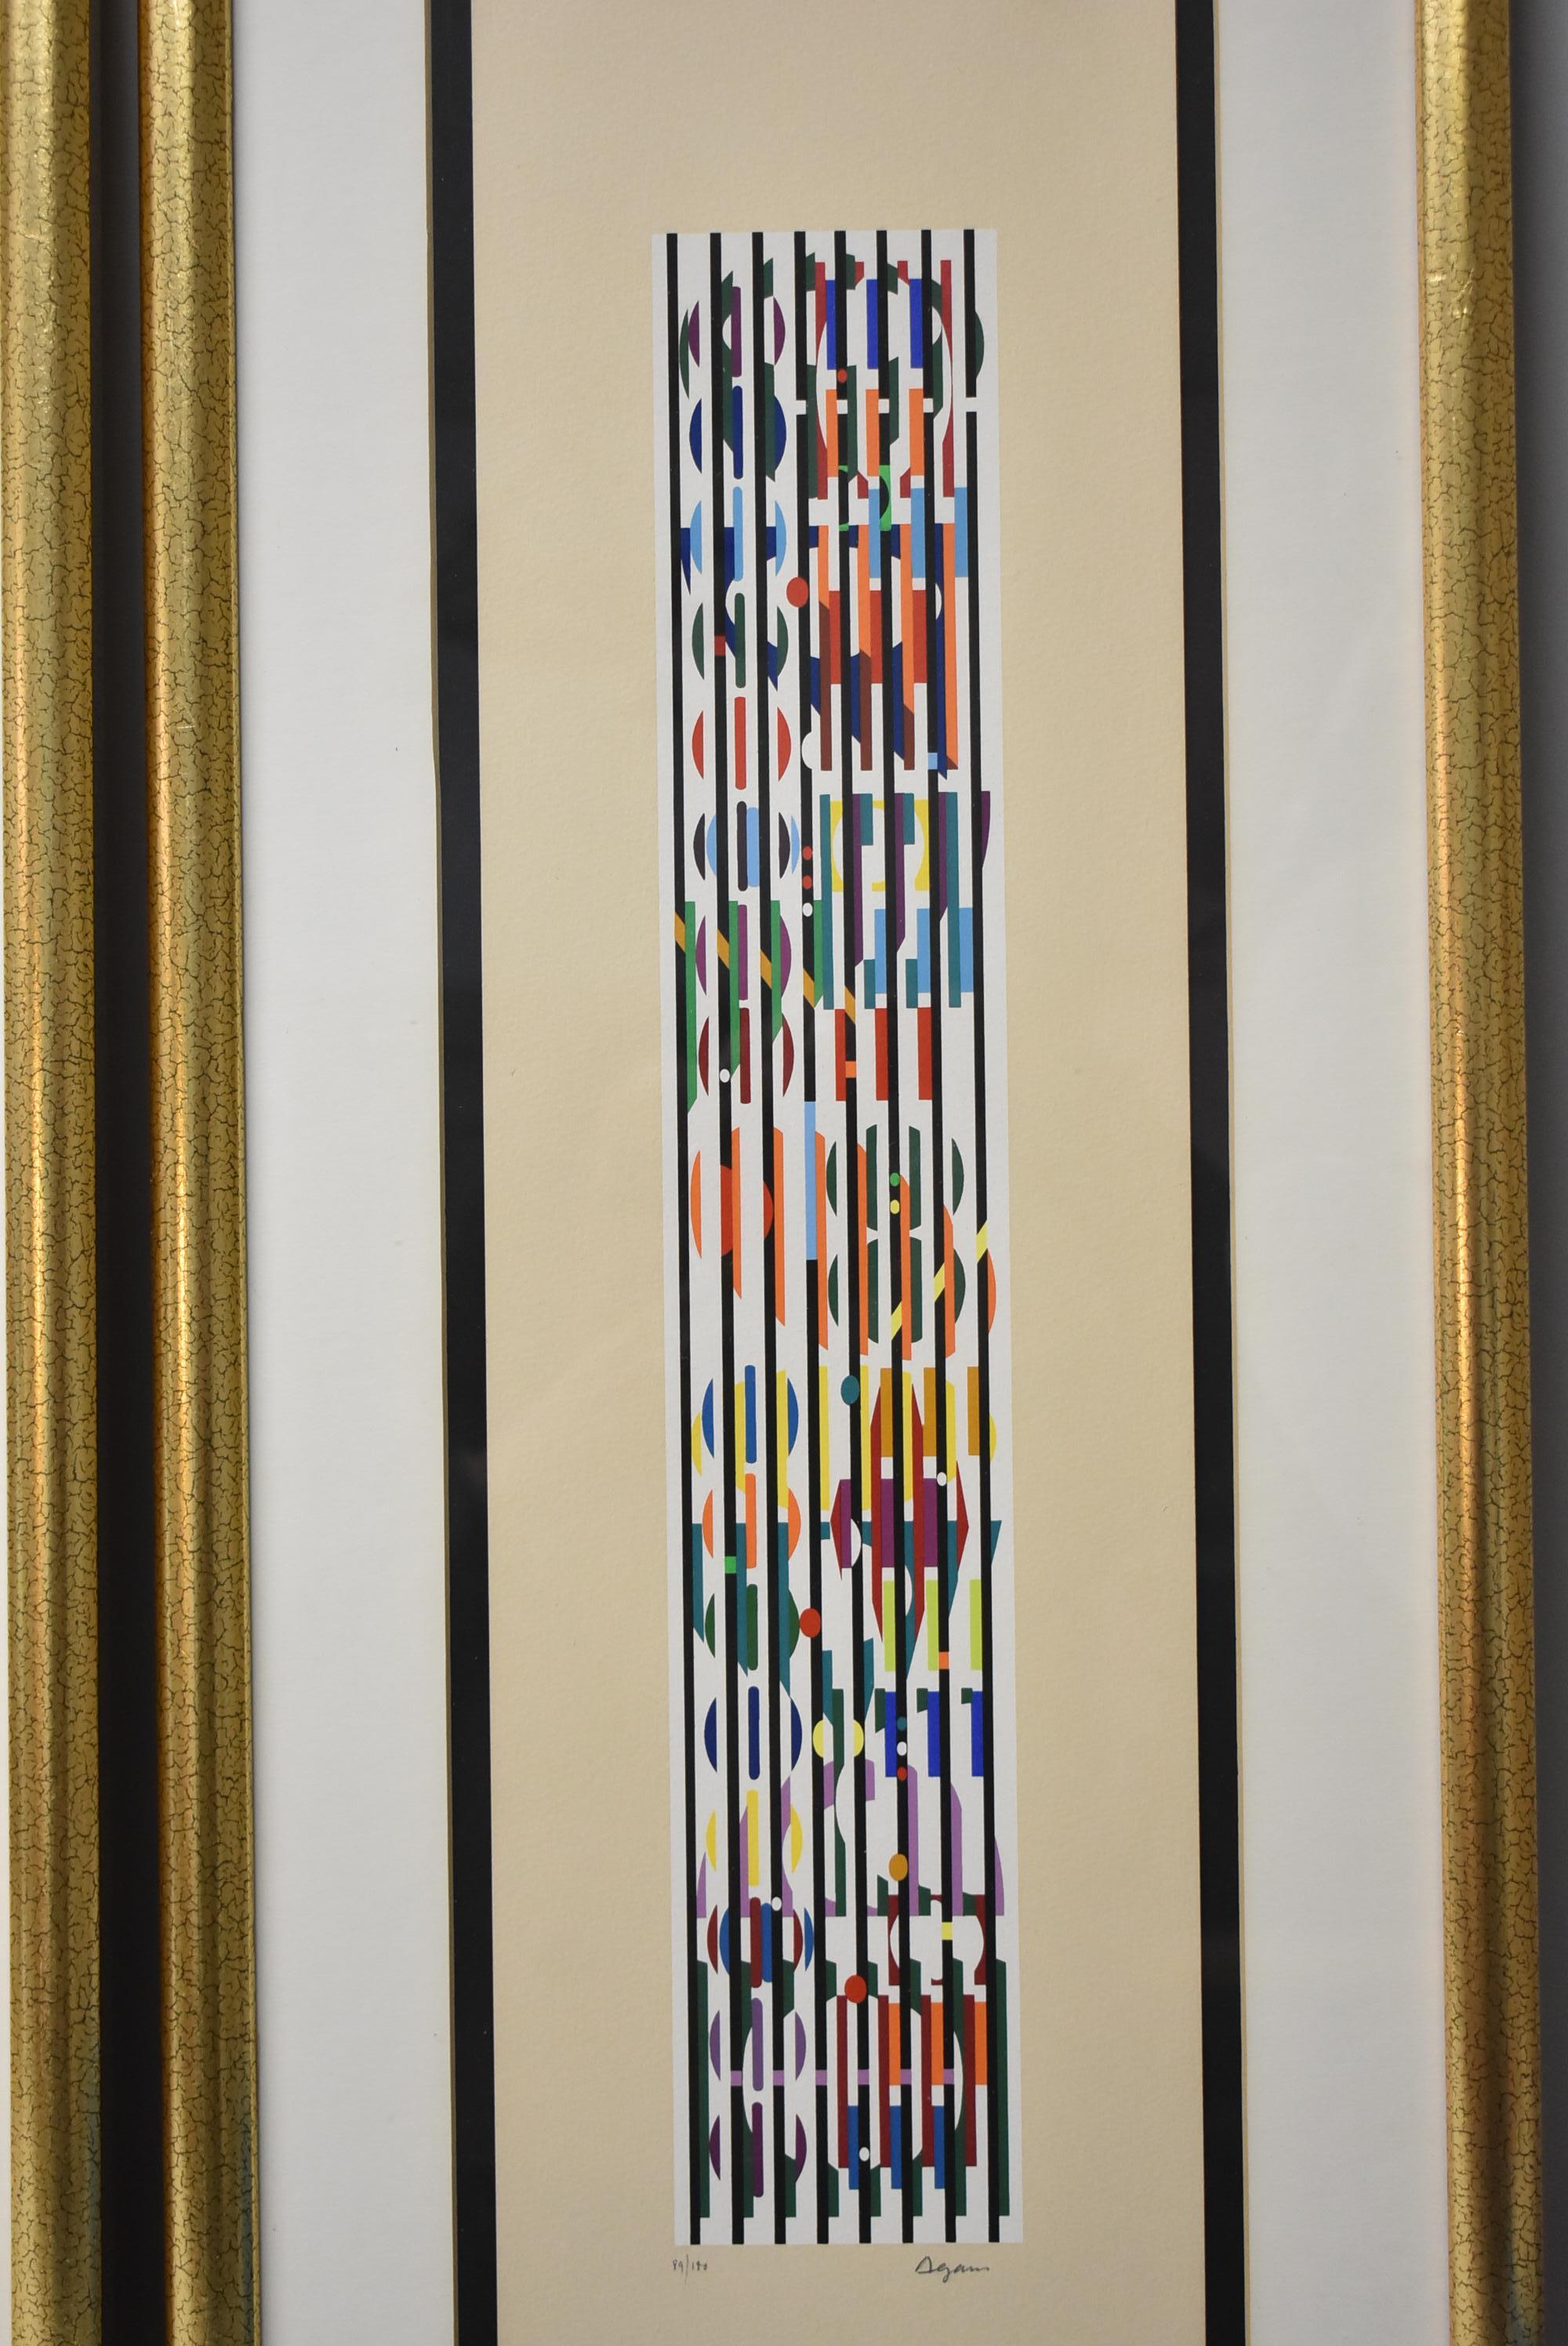 Four Limited Edition Prints By Yaacov Agam 89 / 180 In Good Condition For Sale In Toledo, OH